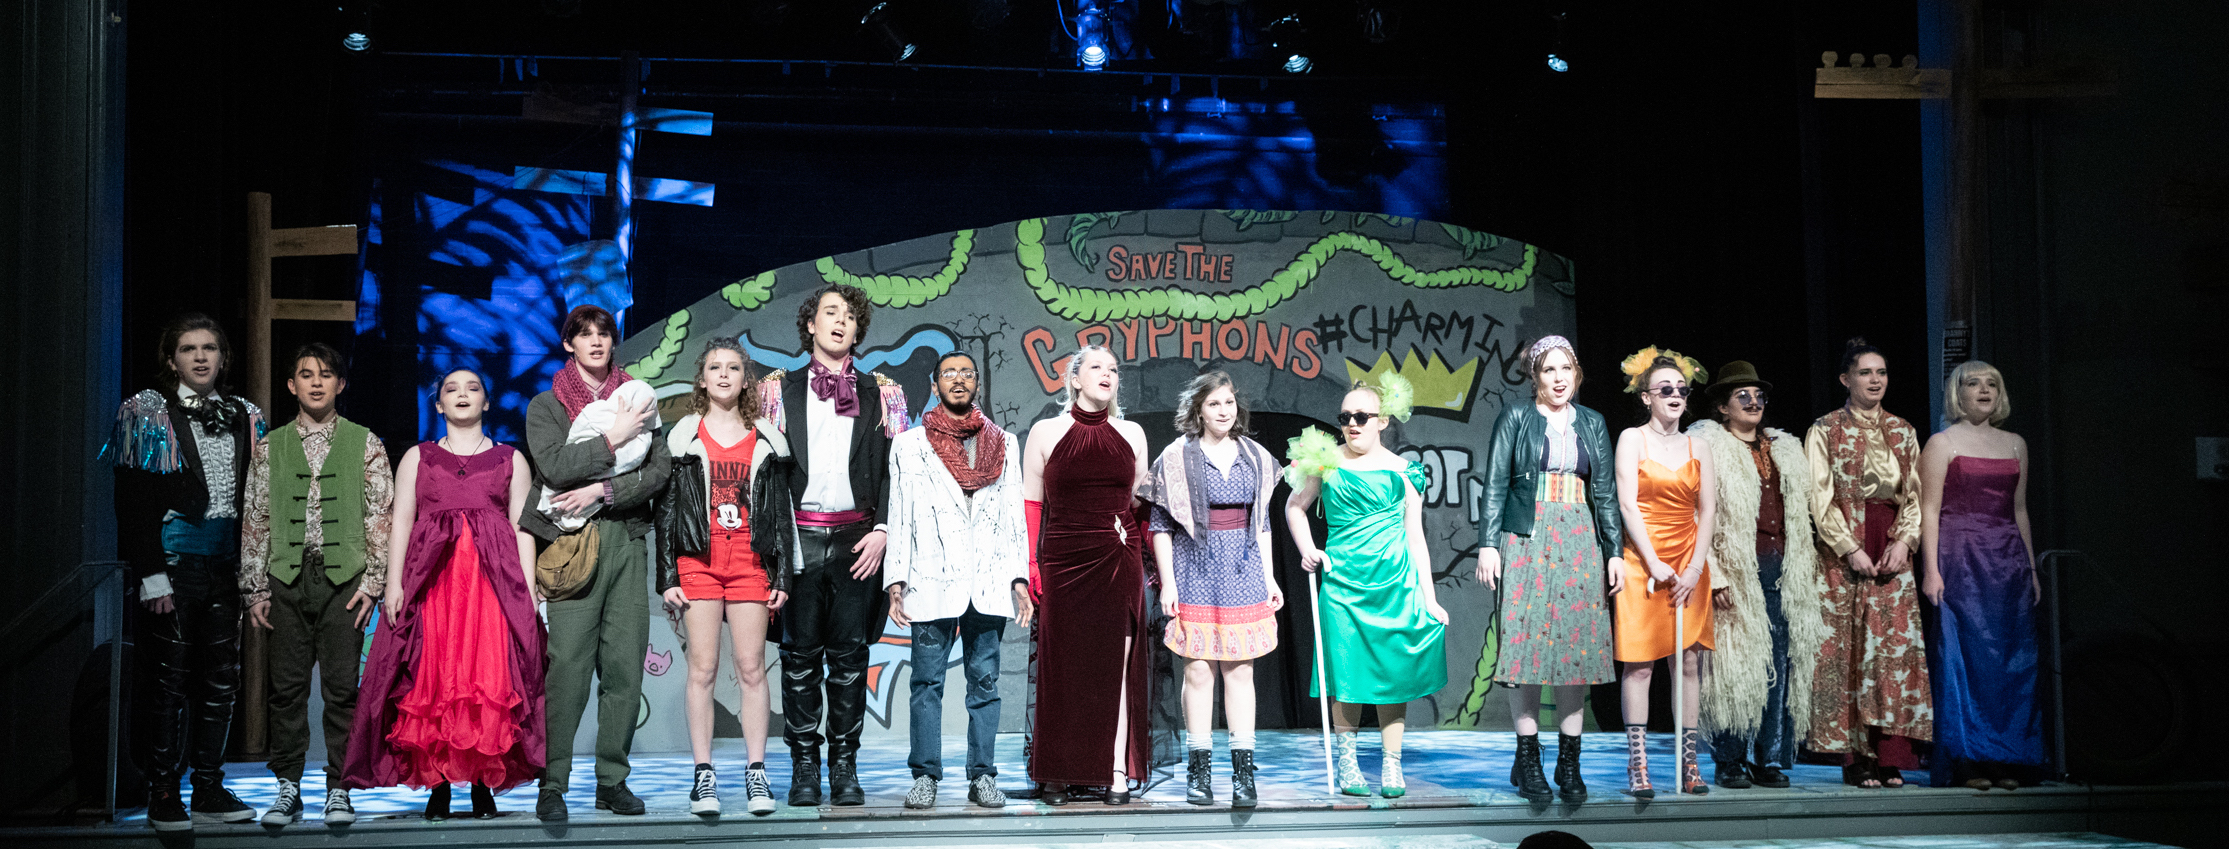 The entire cast on stage with bright costumes on